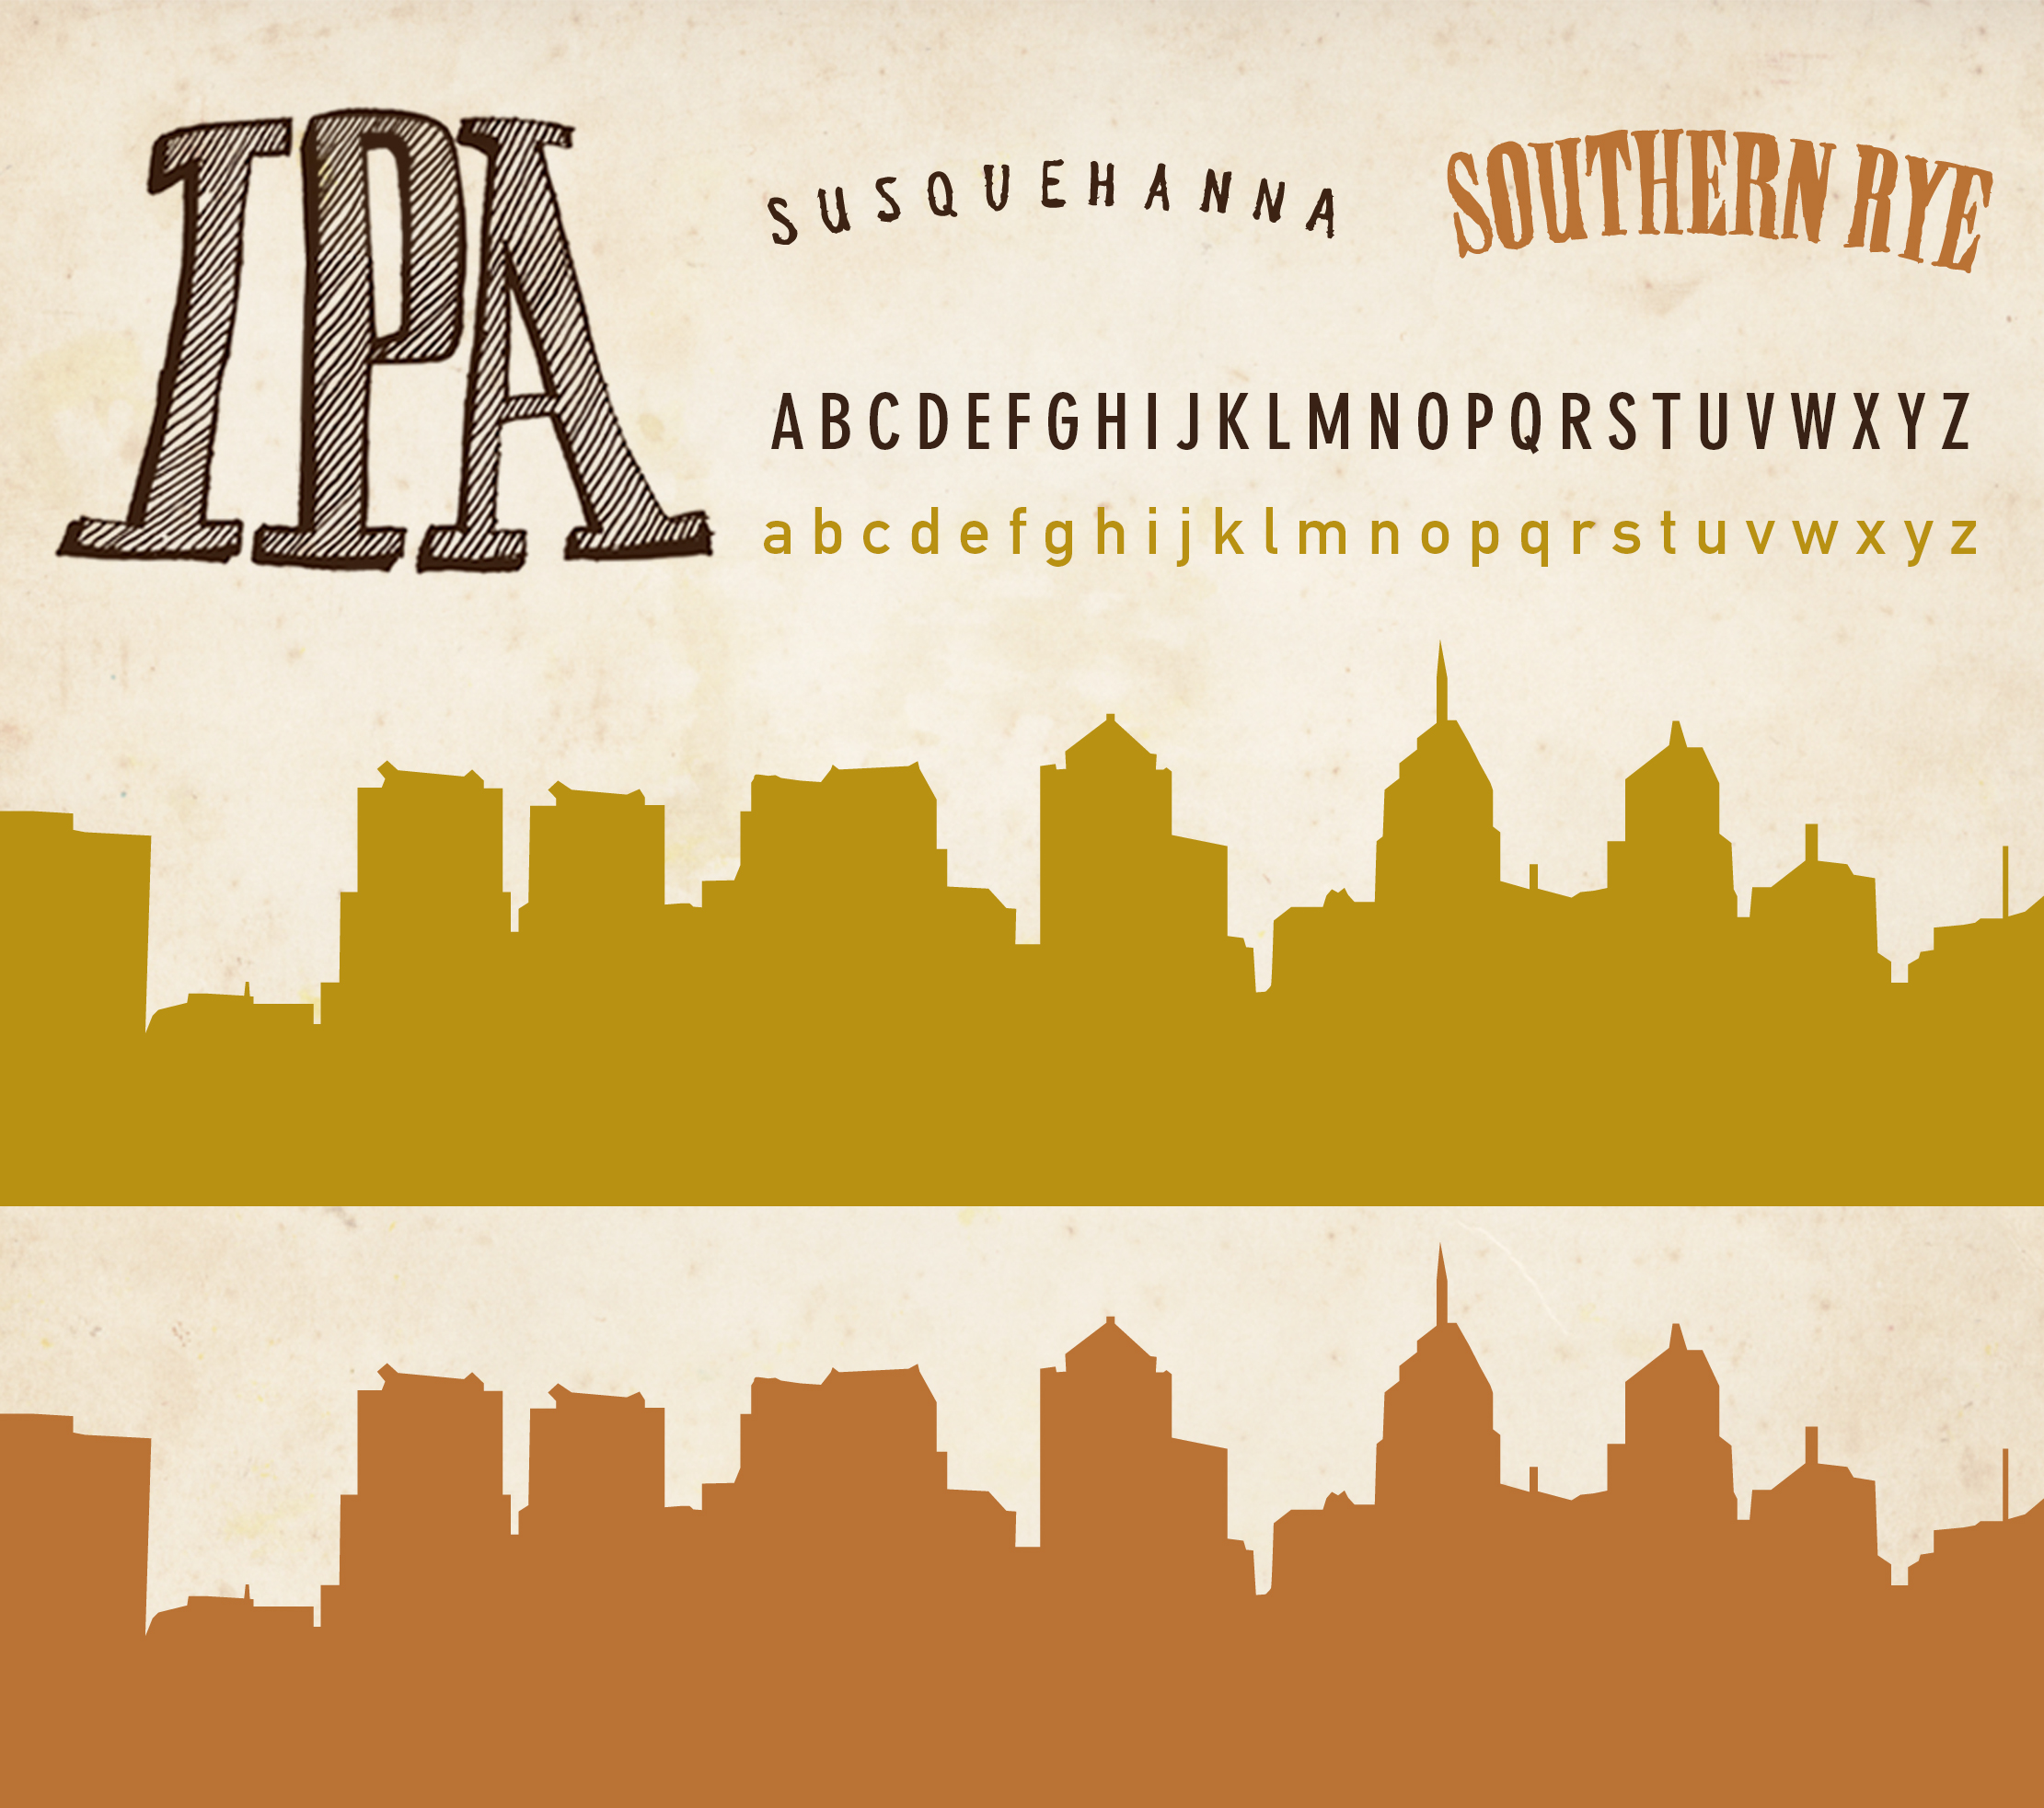 Susquehanna Brewing Co Southern Rye IPA Branding by Just Make Things